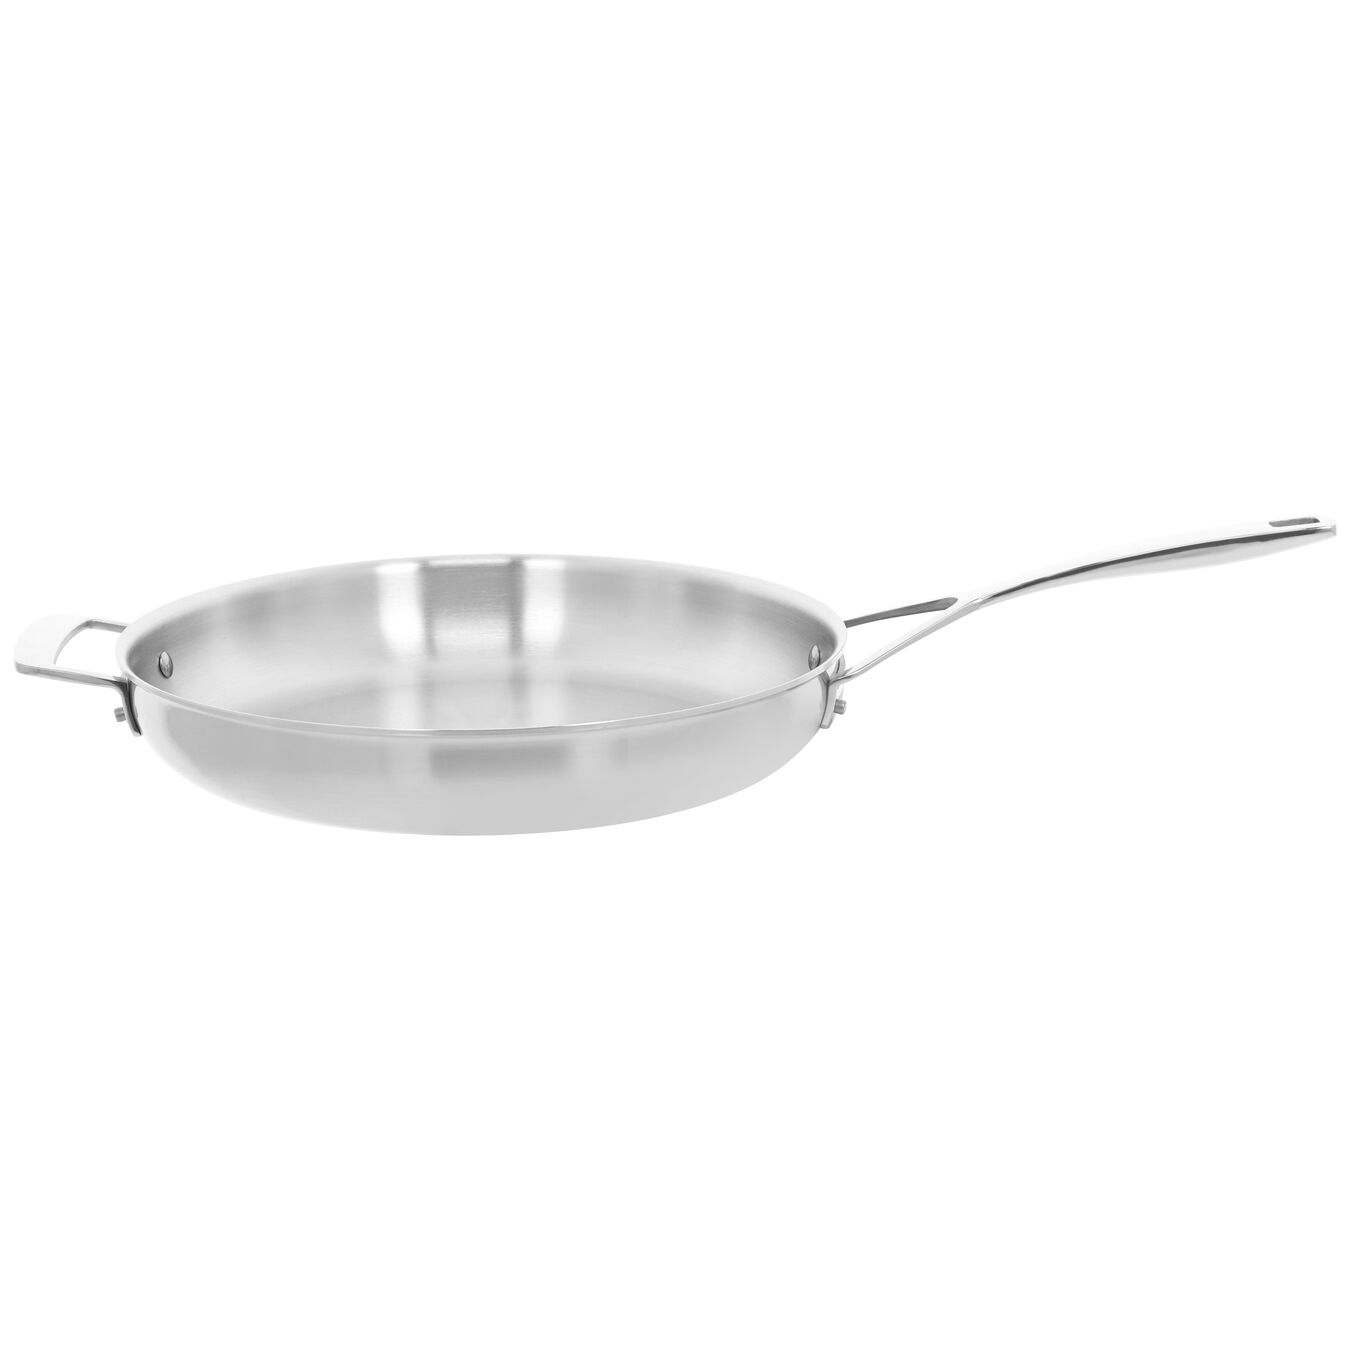 32 cm / 12.5 inch 18/10 Stainless Steel frying pan with lid,,large 3